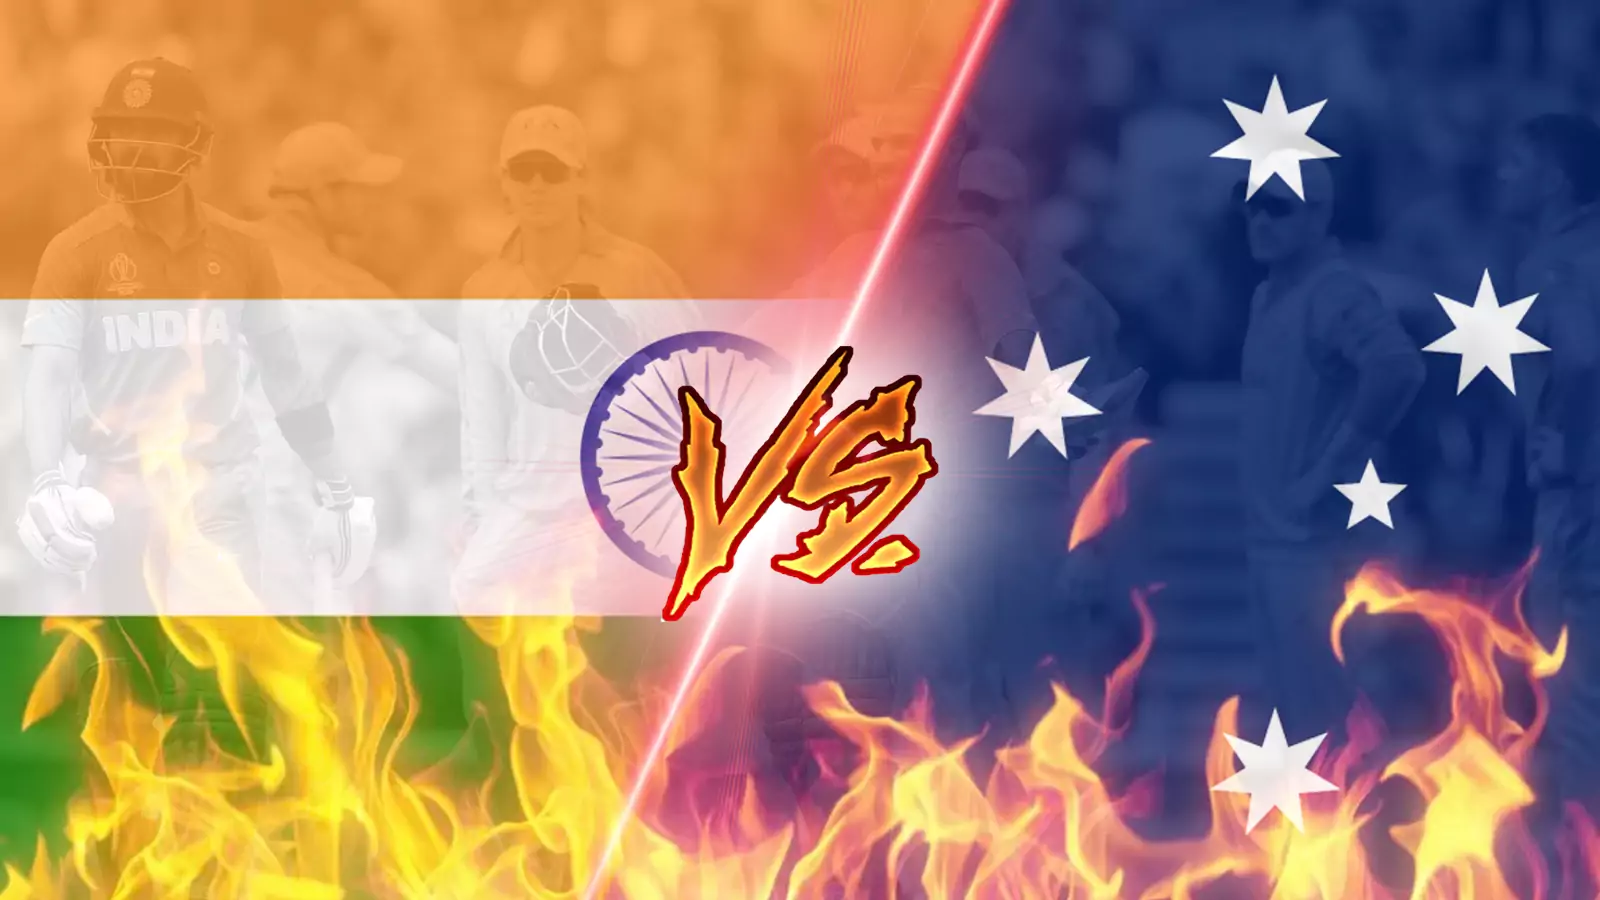 Bet on your favorite Indian or Australian cricket team.